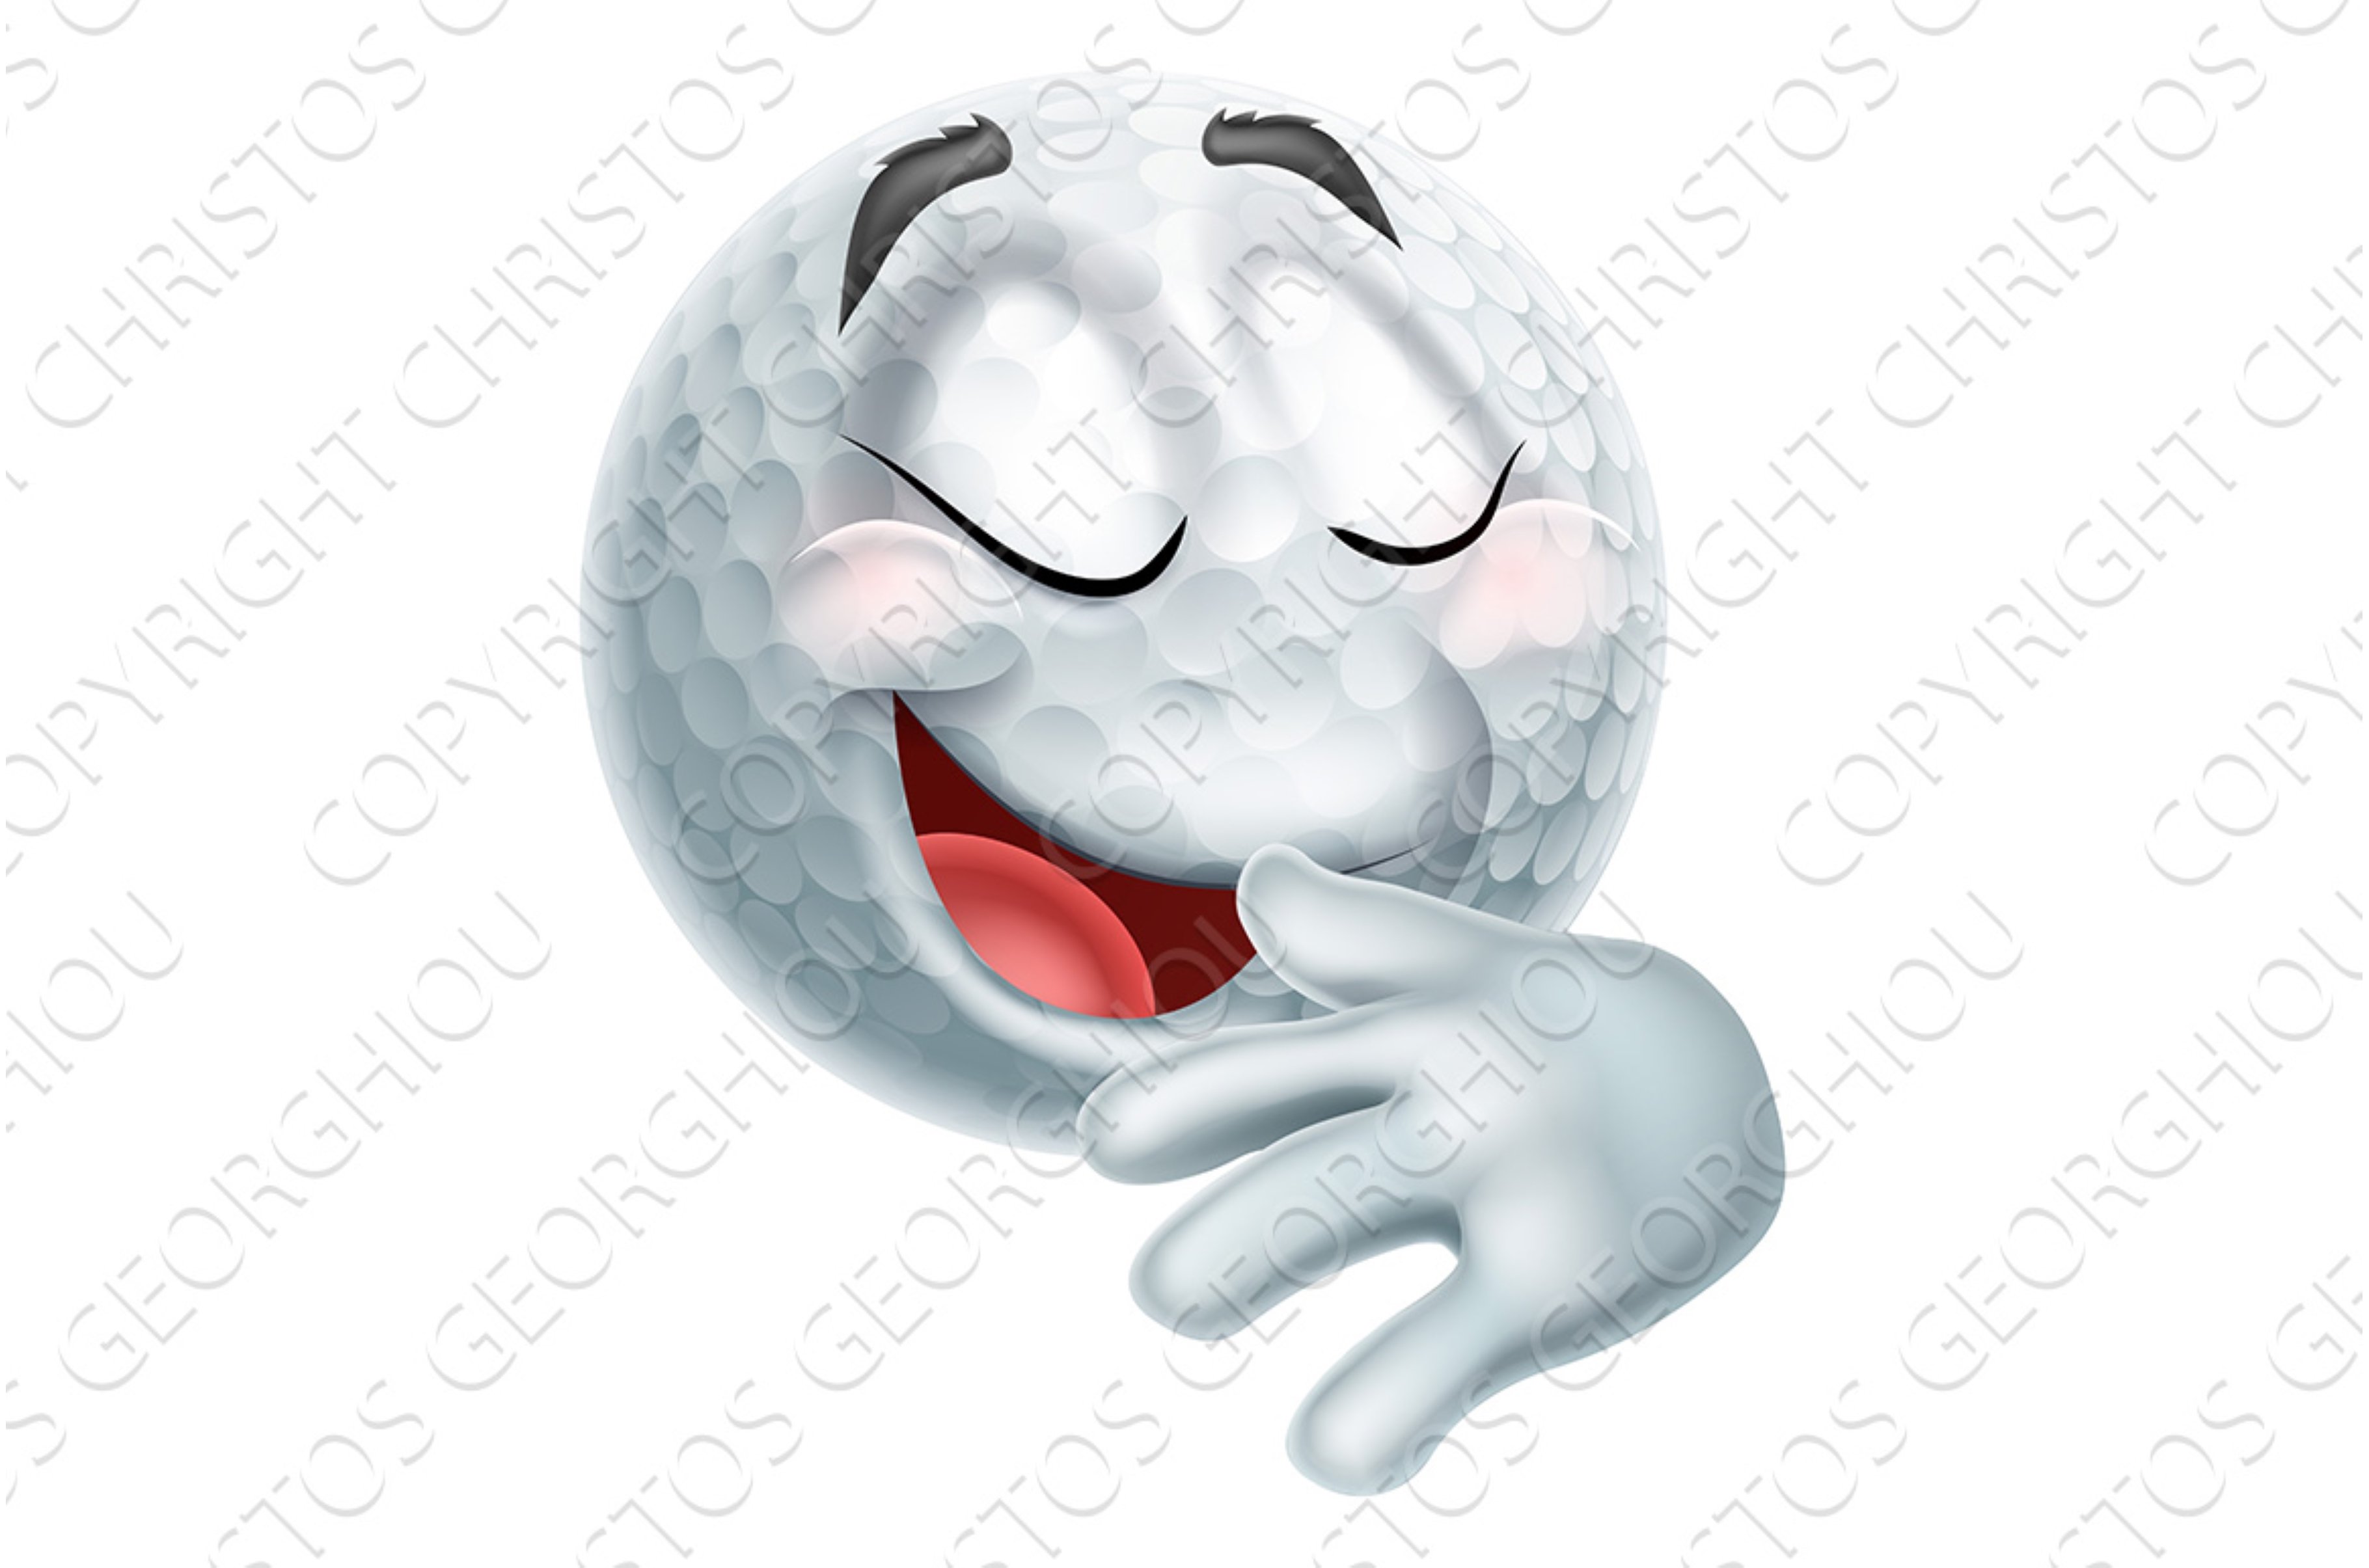 Proud Pleased Golf Ball Emoticon cover image.